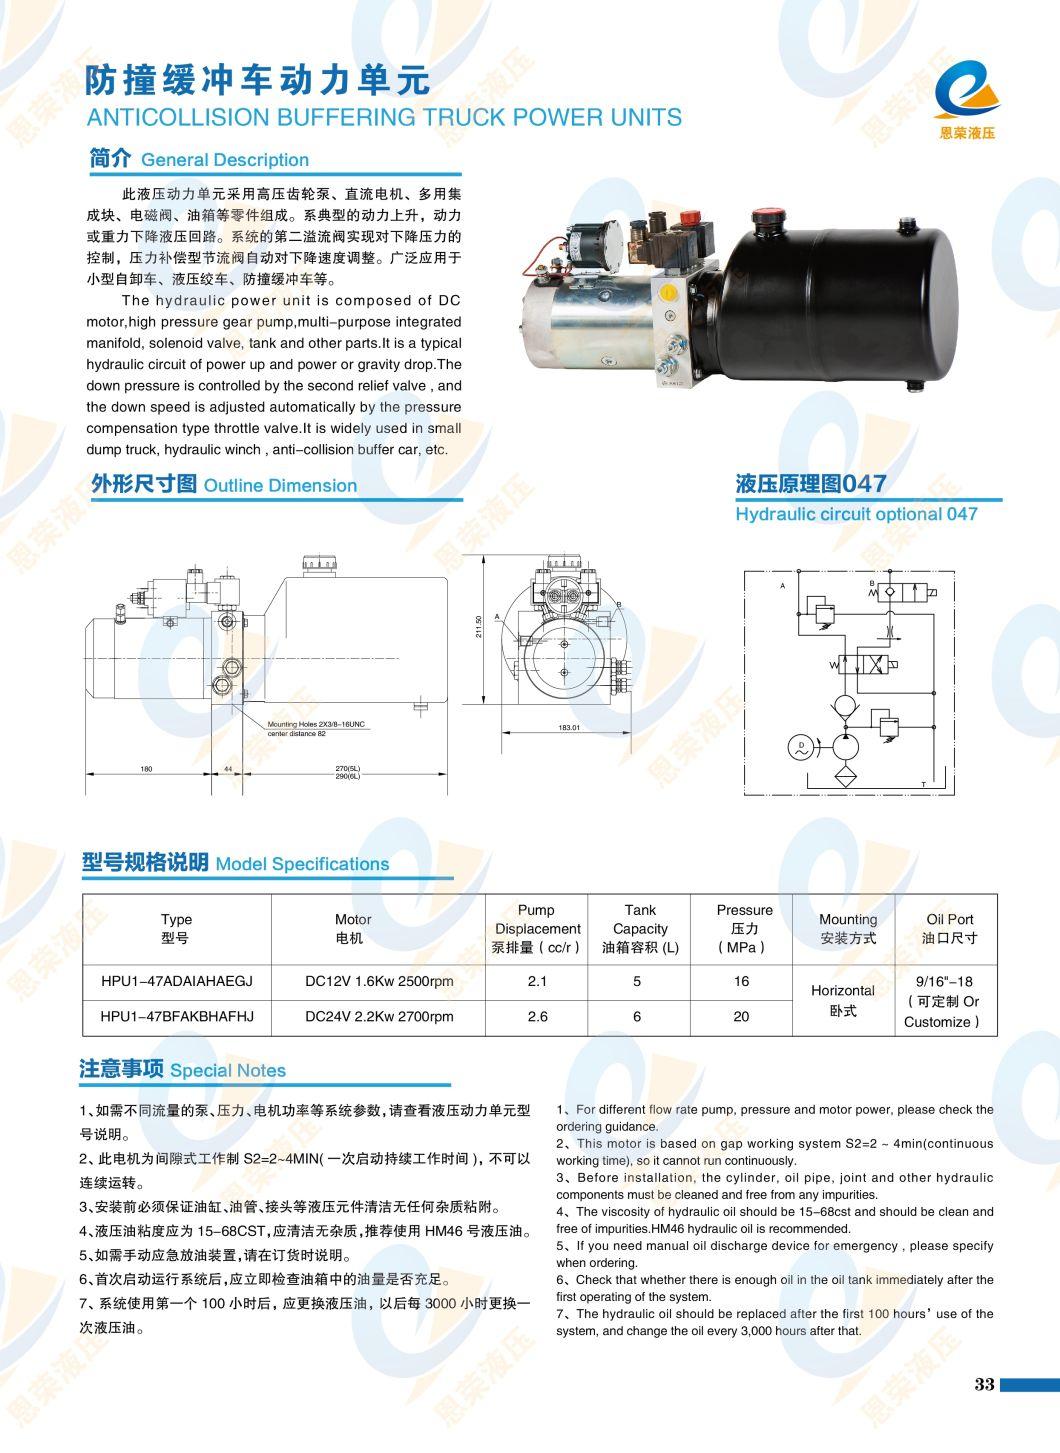 The Double Acting Hydraulic Pump Device for Dump Truck / Dump Truck Has High Performance